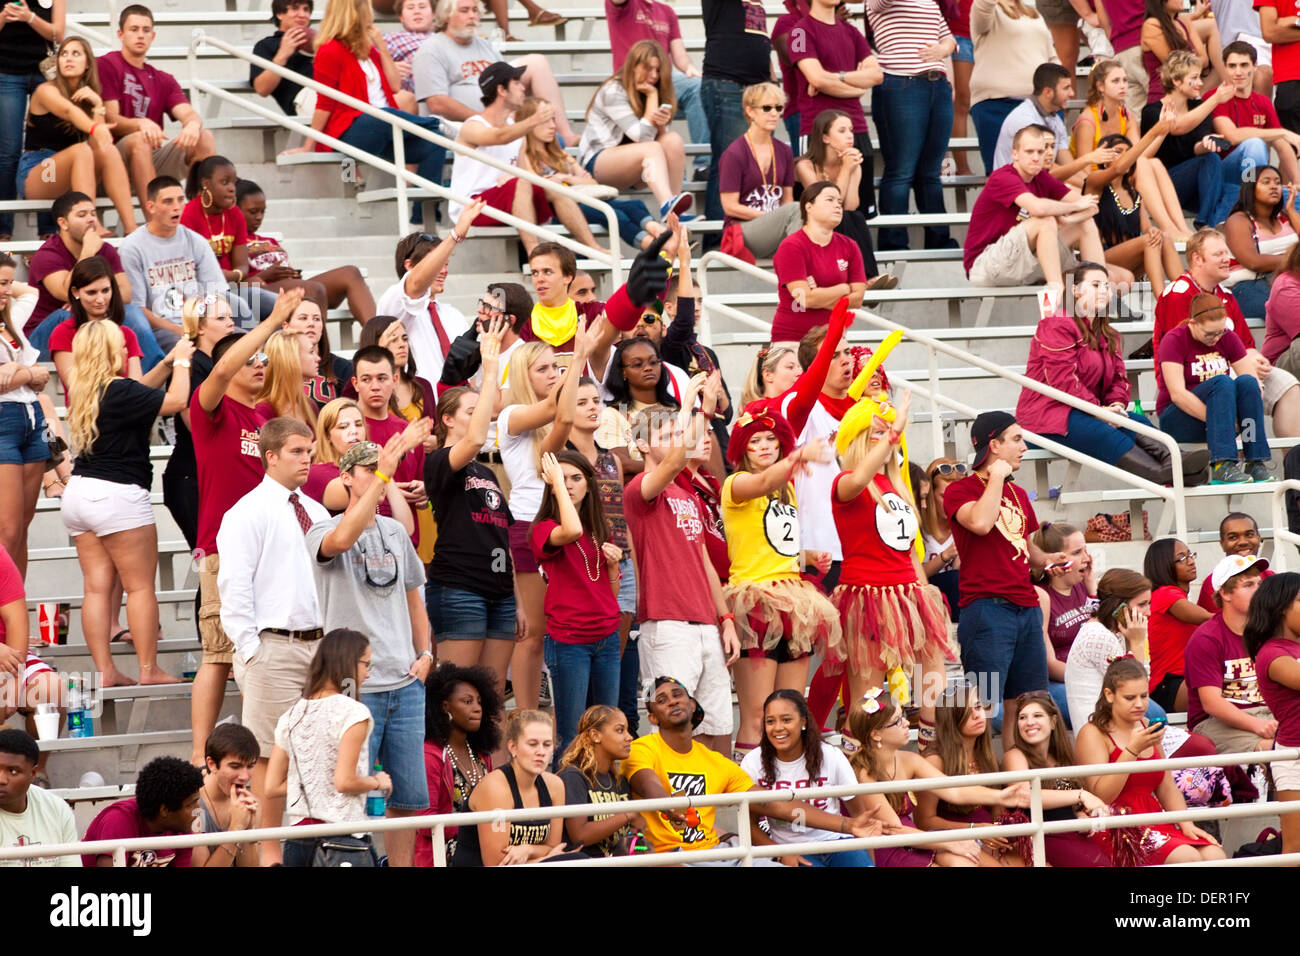 College students at a football game Stock Photo